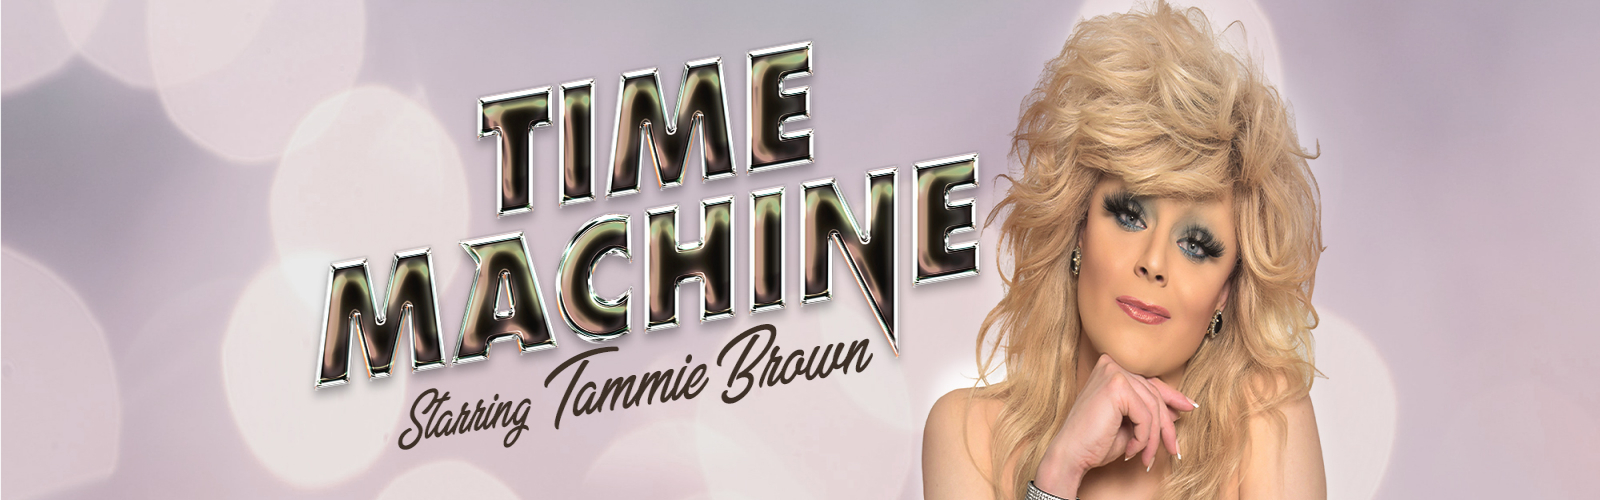 TIME MACHINE - Drag show starring Tammie Brown